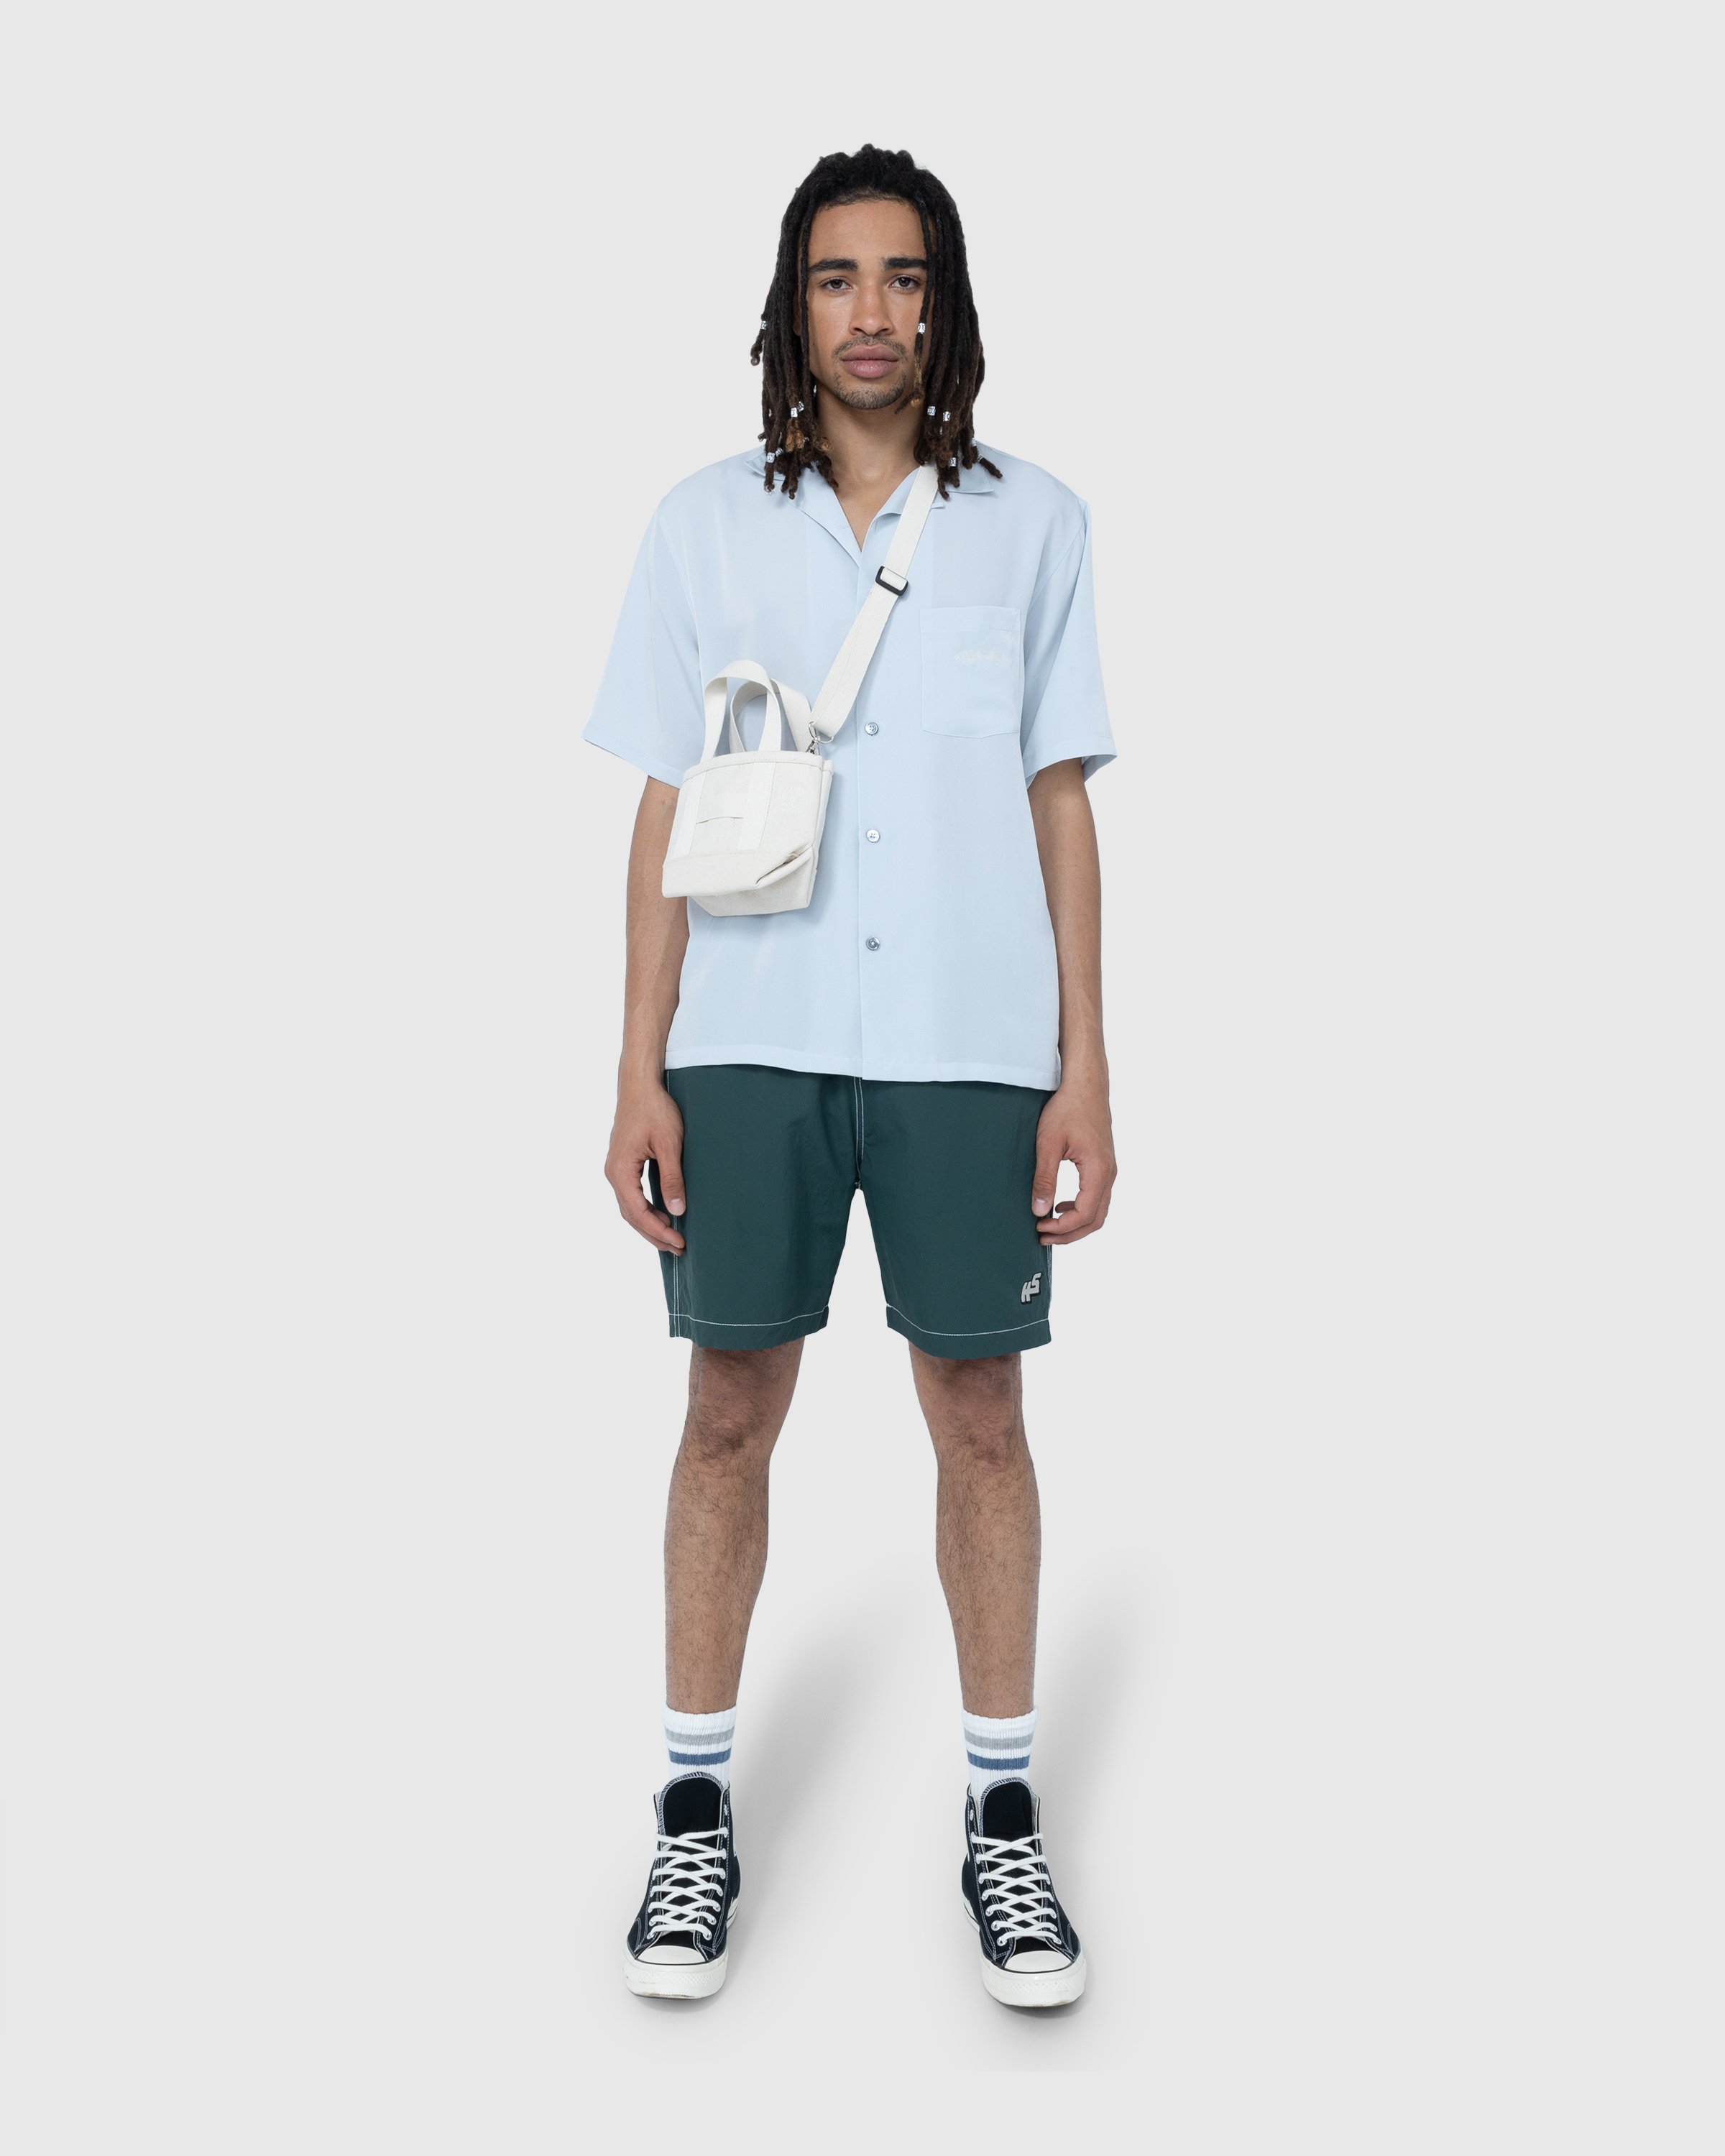 Highsnobiety - Small Canvas "H" Tote Natural - Accessories - Beige - Image 6